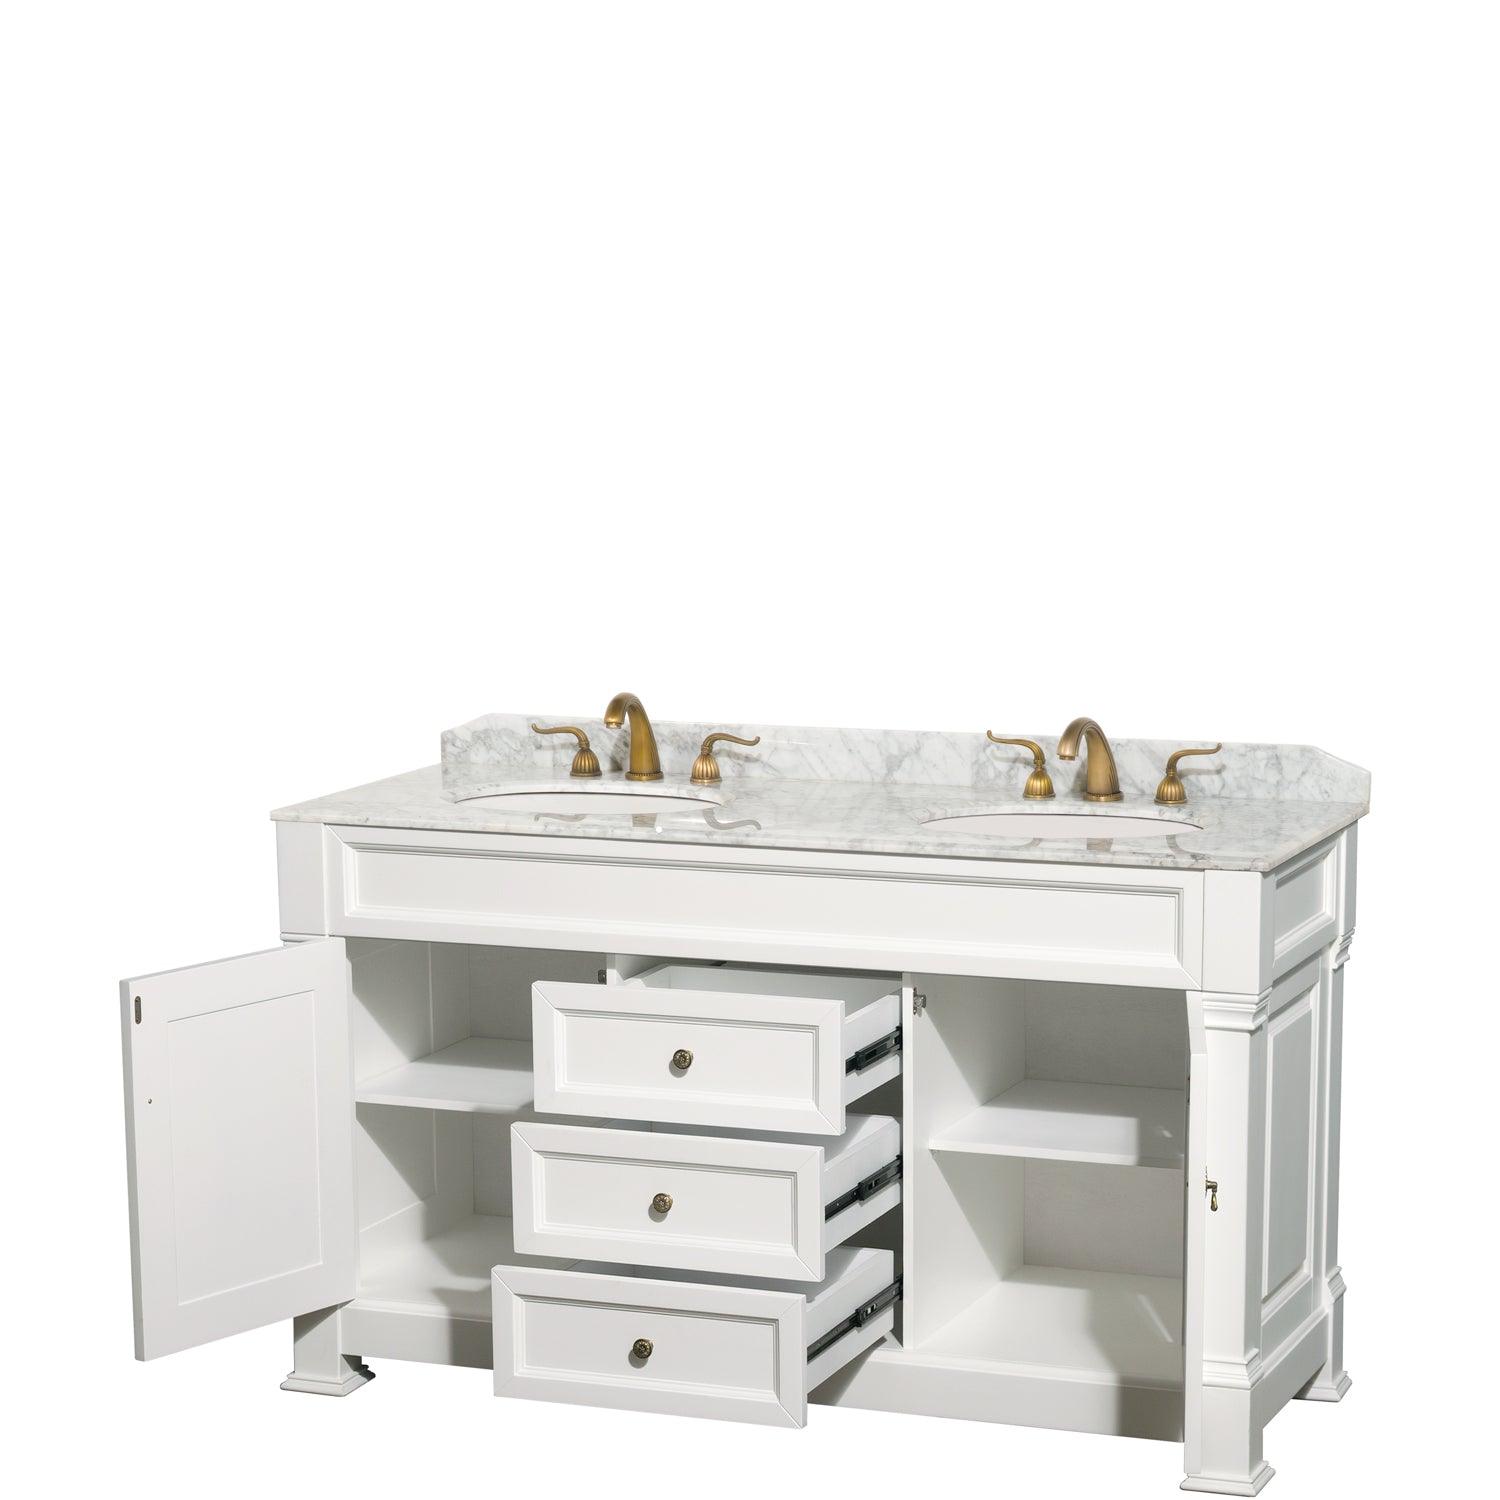 
  
  Wyndham Collection Andover Double Bathroom Vanity, White Carrara Marble Countertop, Undermount Oval Sinks and Optional Mirror
  
